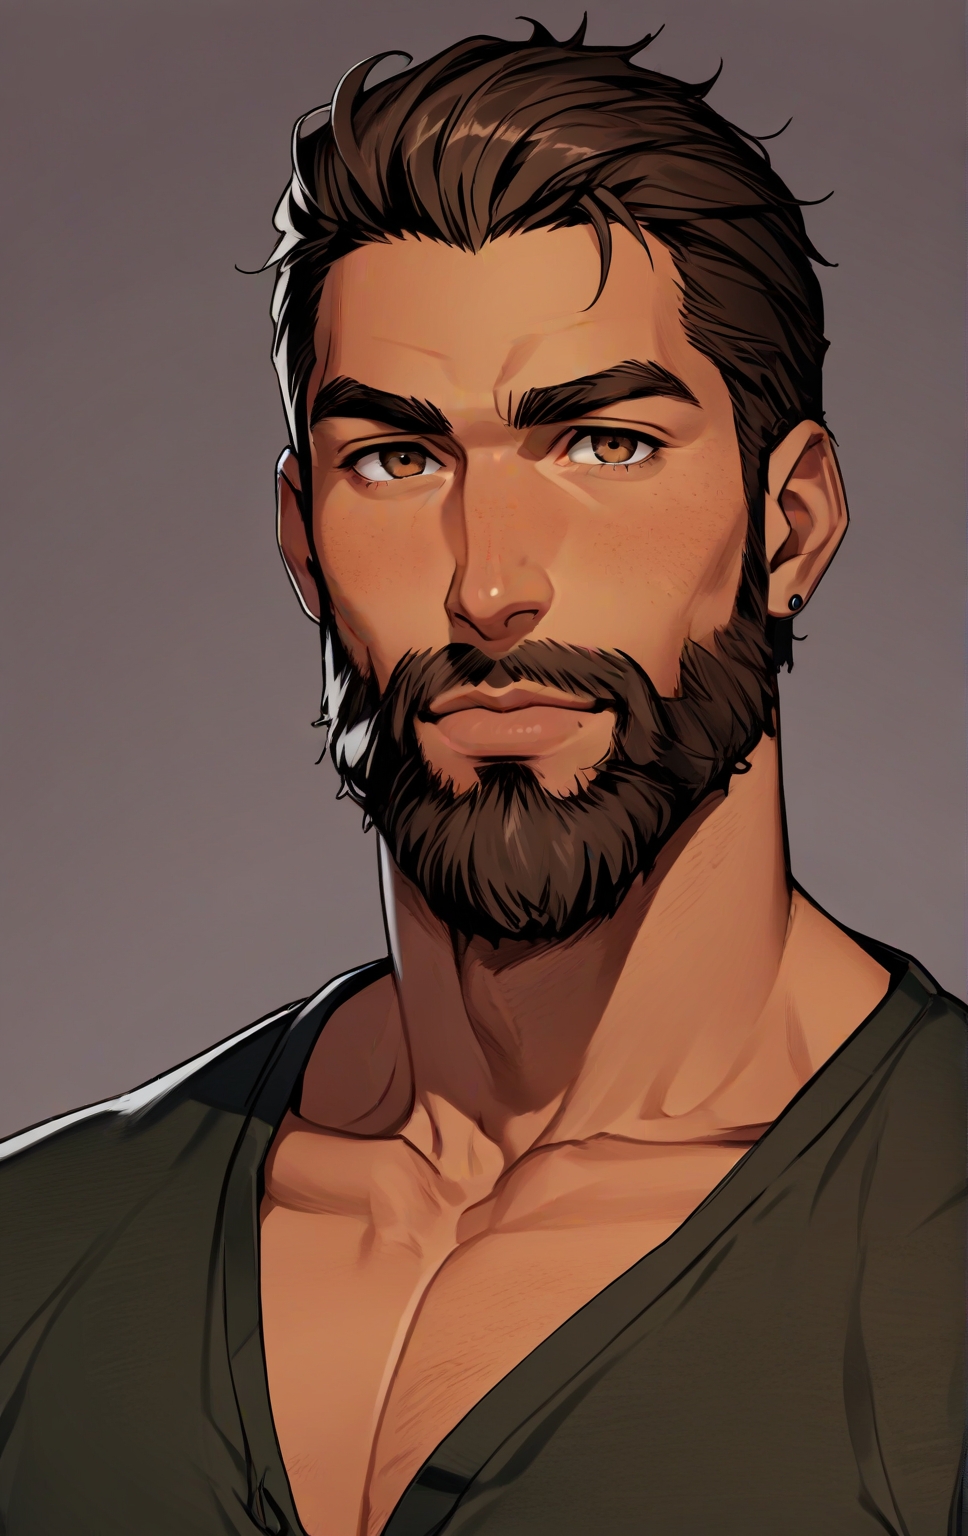 Default_A_man_with_a_tan_beard_with_brown_eyes_and_black_hair_1.jpg